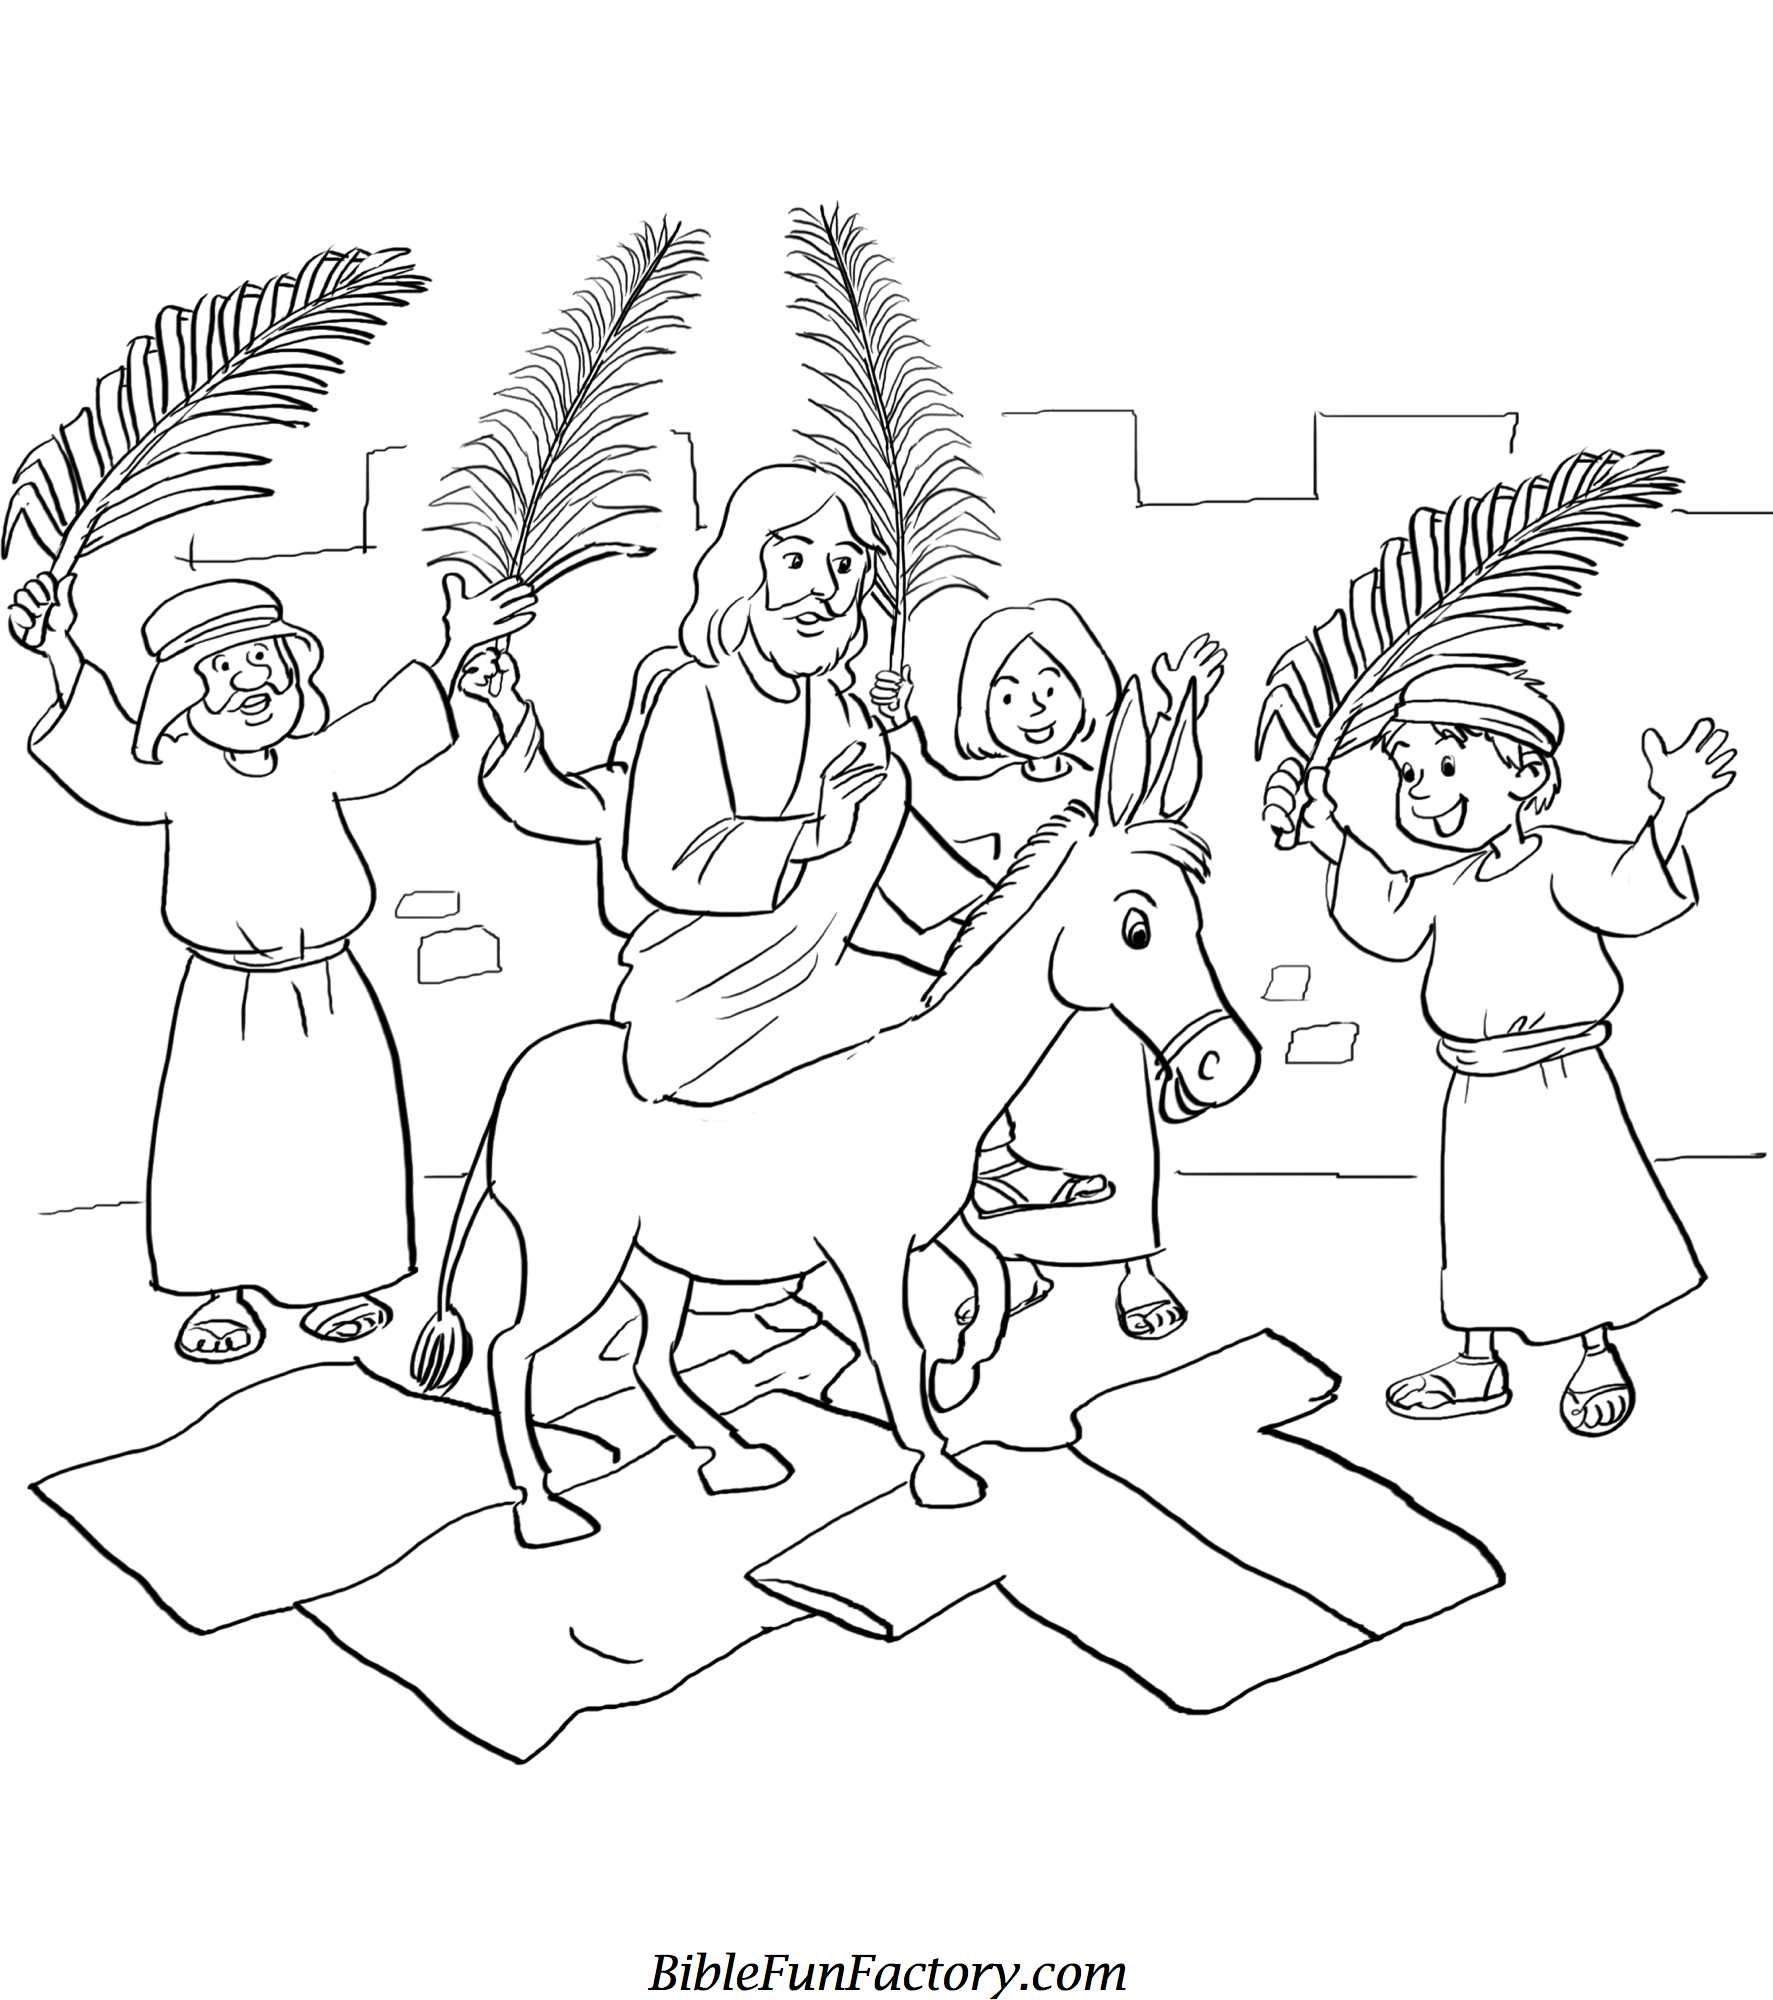 Palm SUnday colouring in